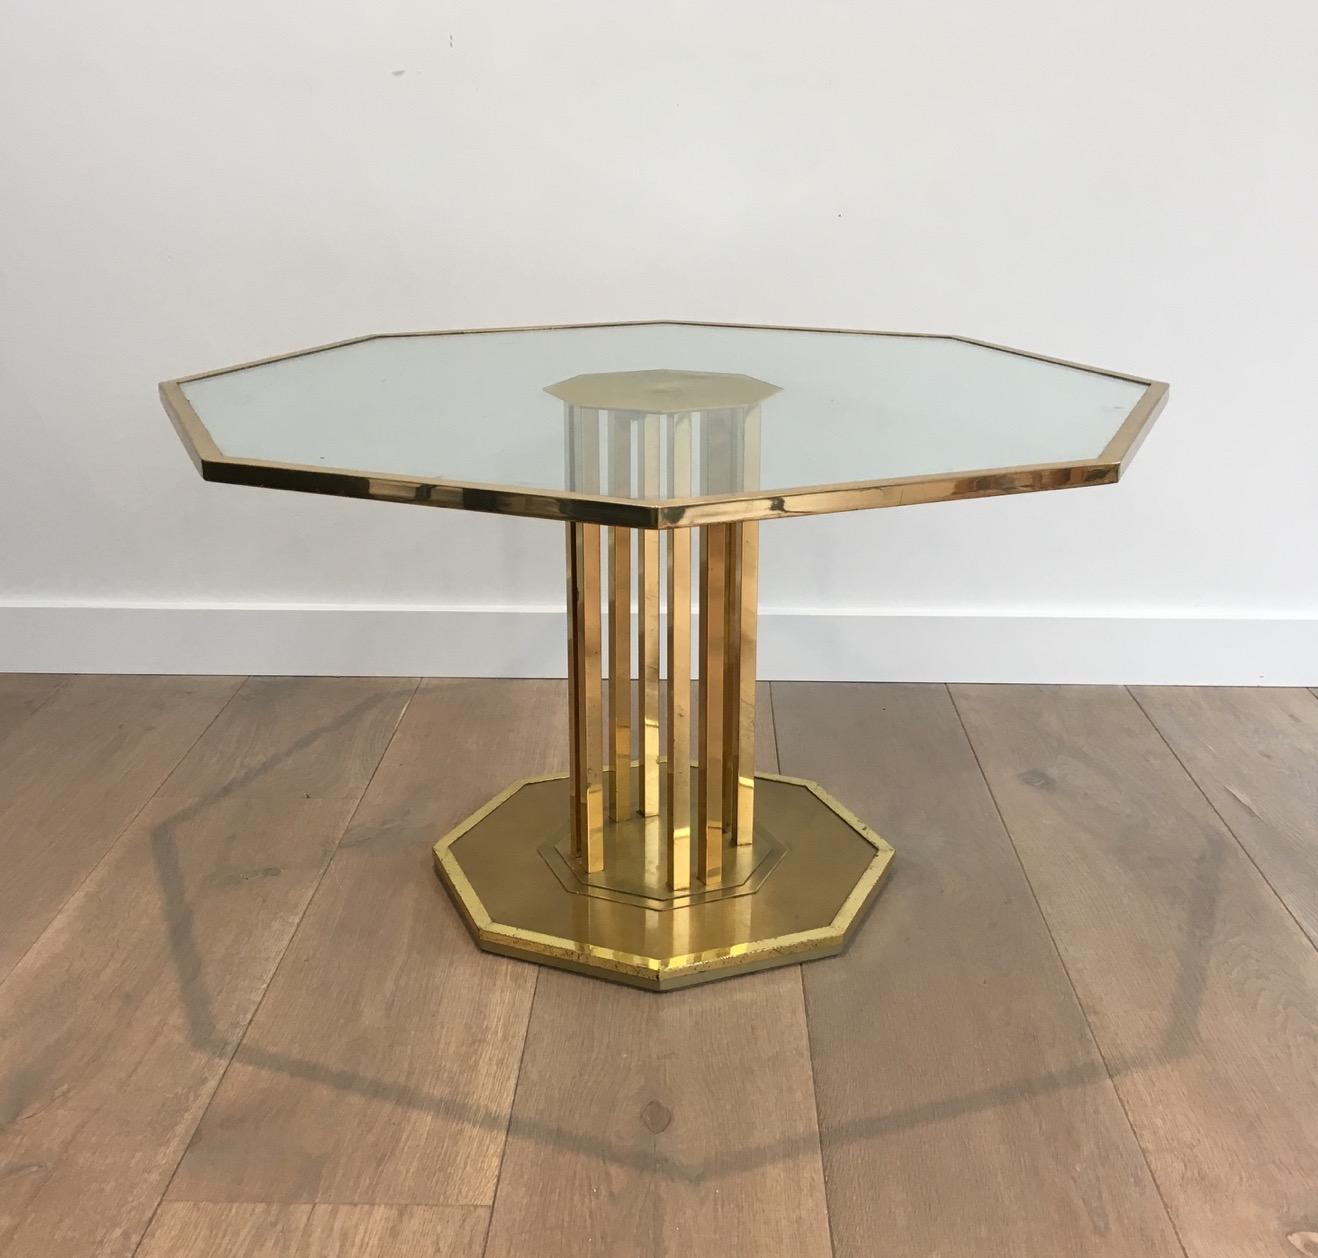 Rare Octagonal Brass and Glass Design Coffee Table, French, circa 1970 For Sale 6